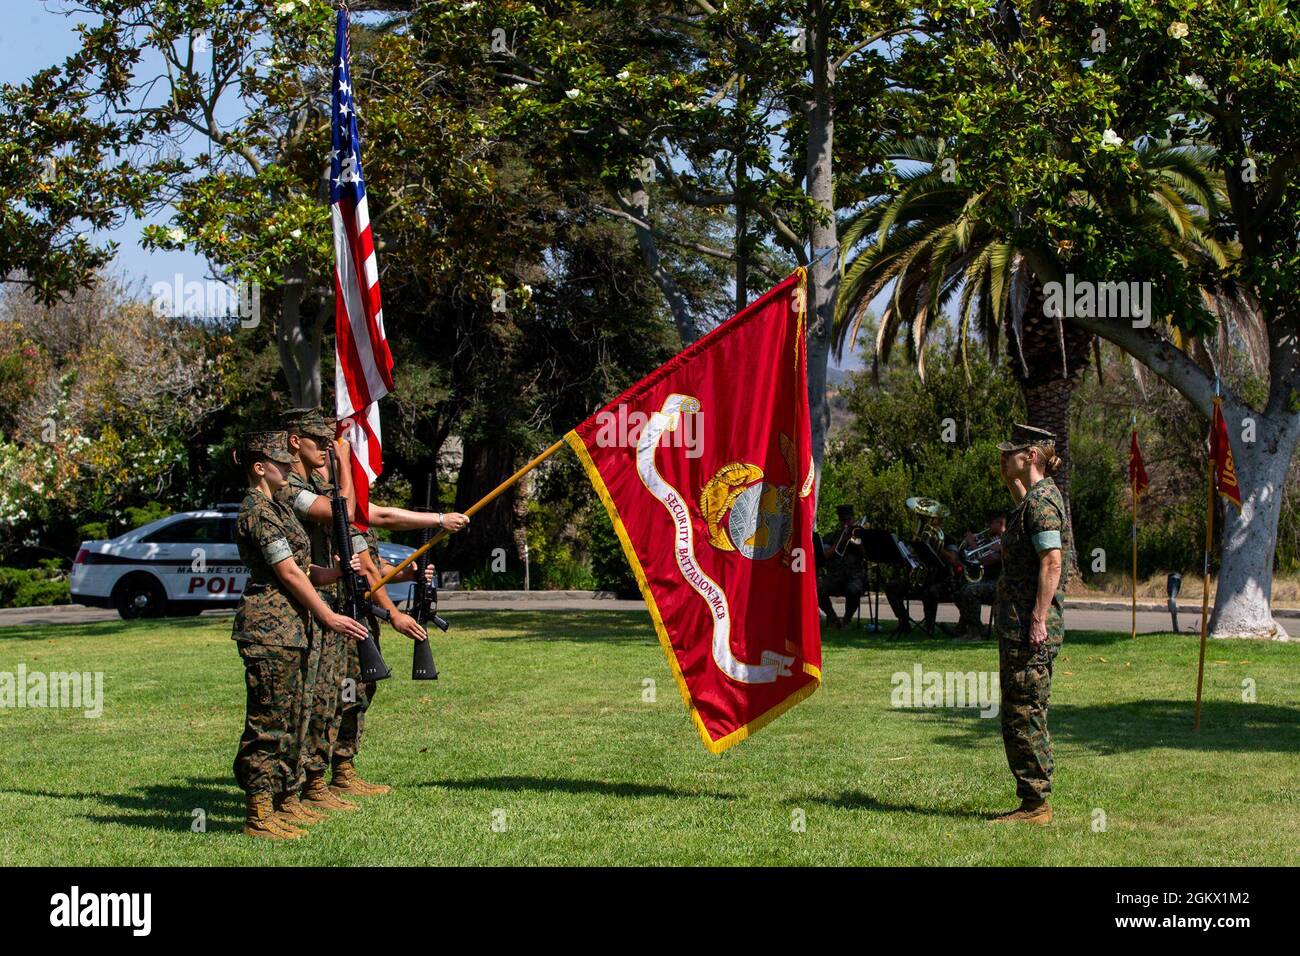 U.S. Marine Lt. Col. Andrea Gulliksen, the commander of troops, salutes the colors during a change of command ceremony for Security and Emergency Services Battalion, Marine Corps Base Camp Pendleton, at the Santa Margarita Ranch House on Camp Pendleton, California, July 14, 2021. During the ceremony, Col. Edward Greeley, the outgoing commanding officer of SES Bn., relinquished command to Col. John Black. Greeley had been the commander of SES Bn. since July 2019. Stock Photo